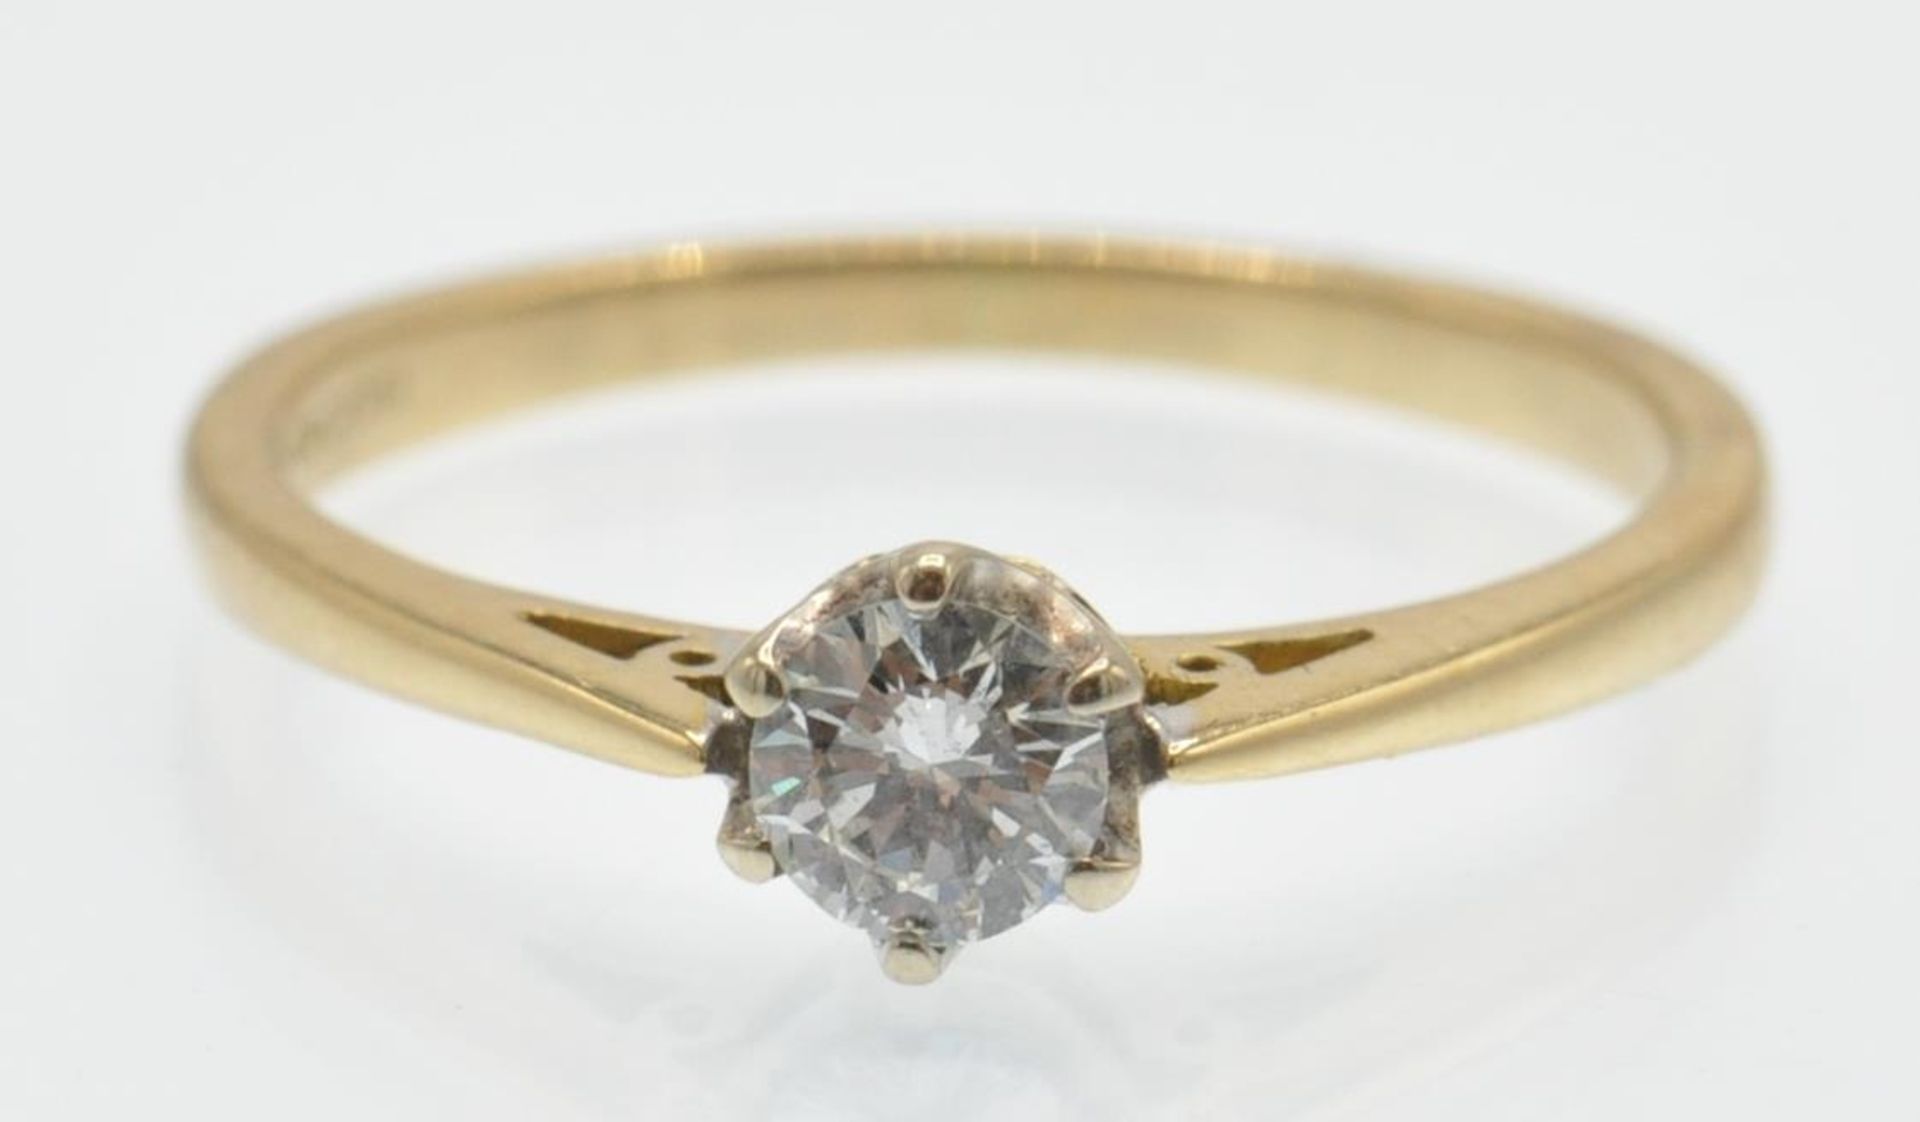 A Hallmarked 18ct Gold & Diamond Solitaire Ring